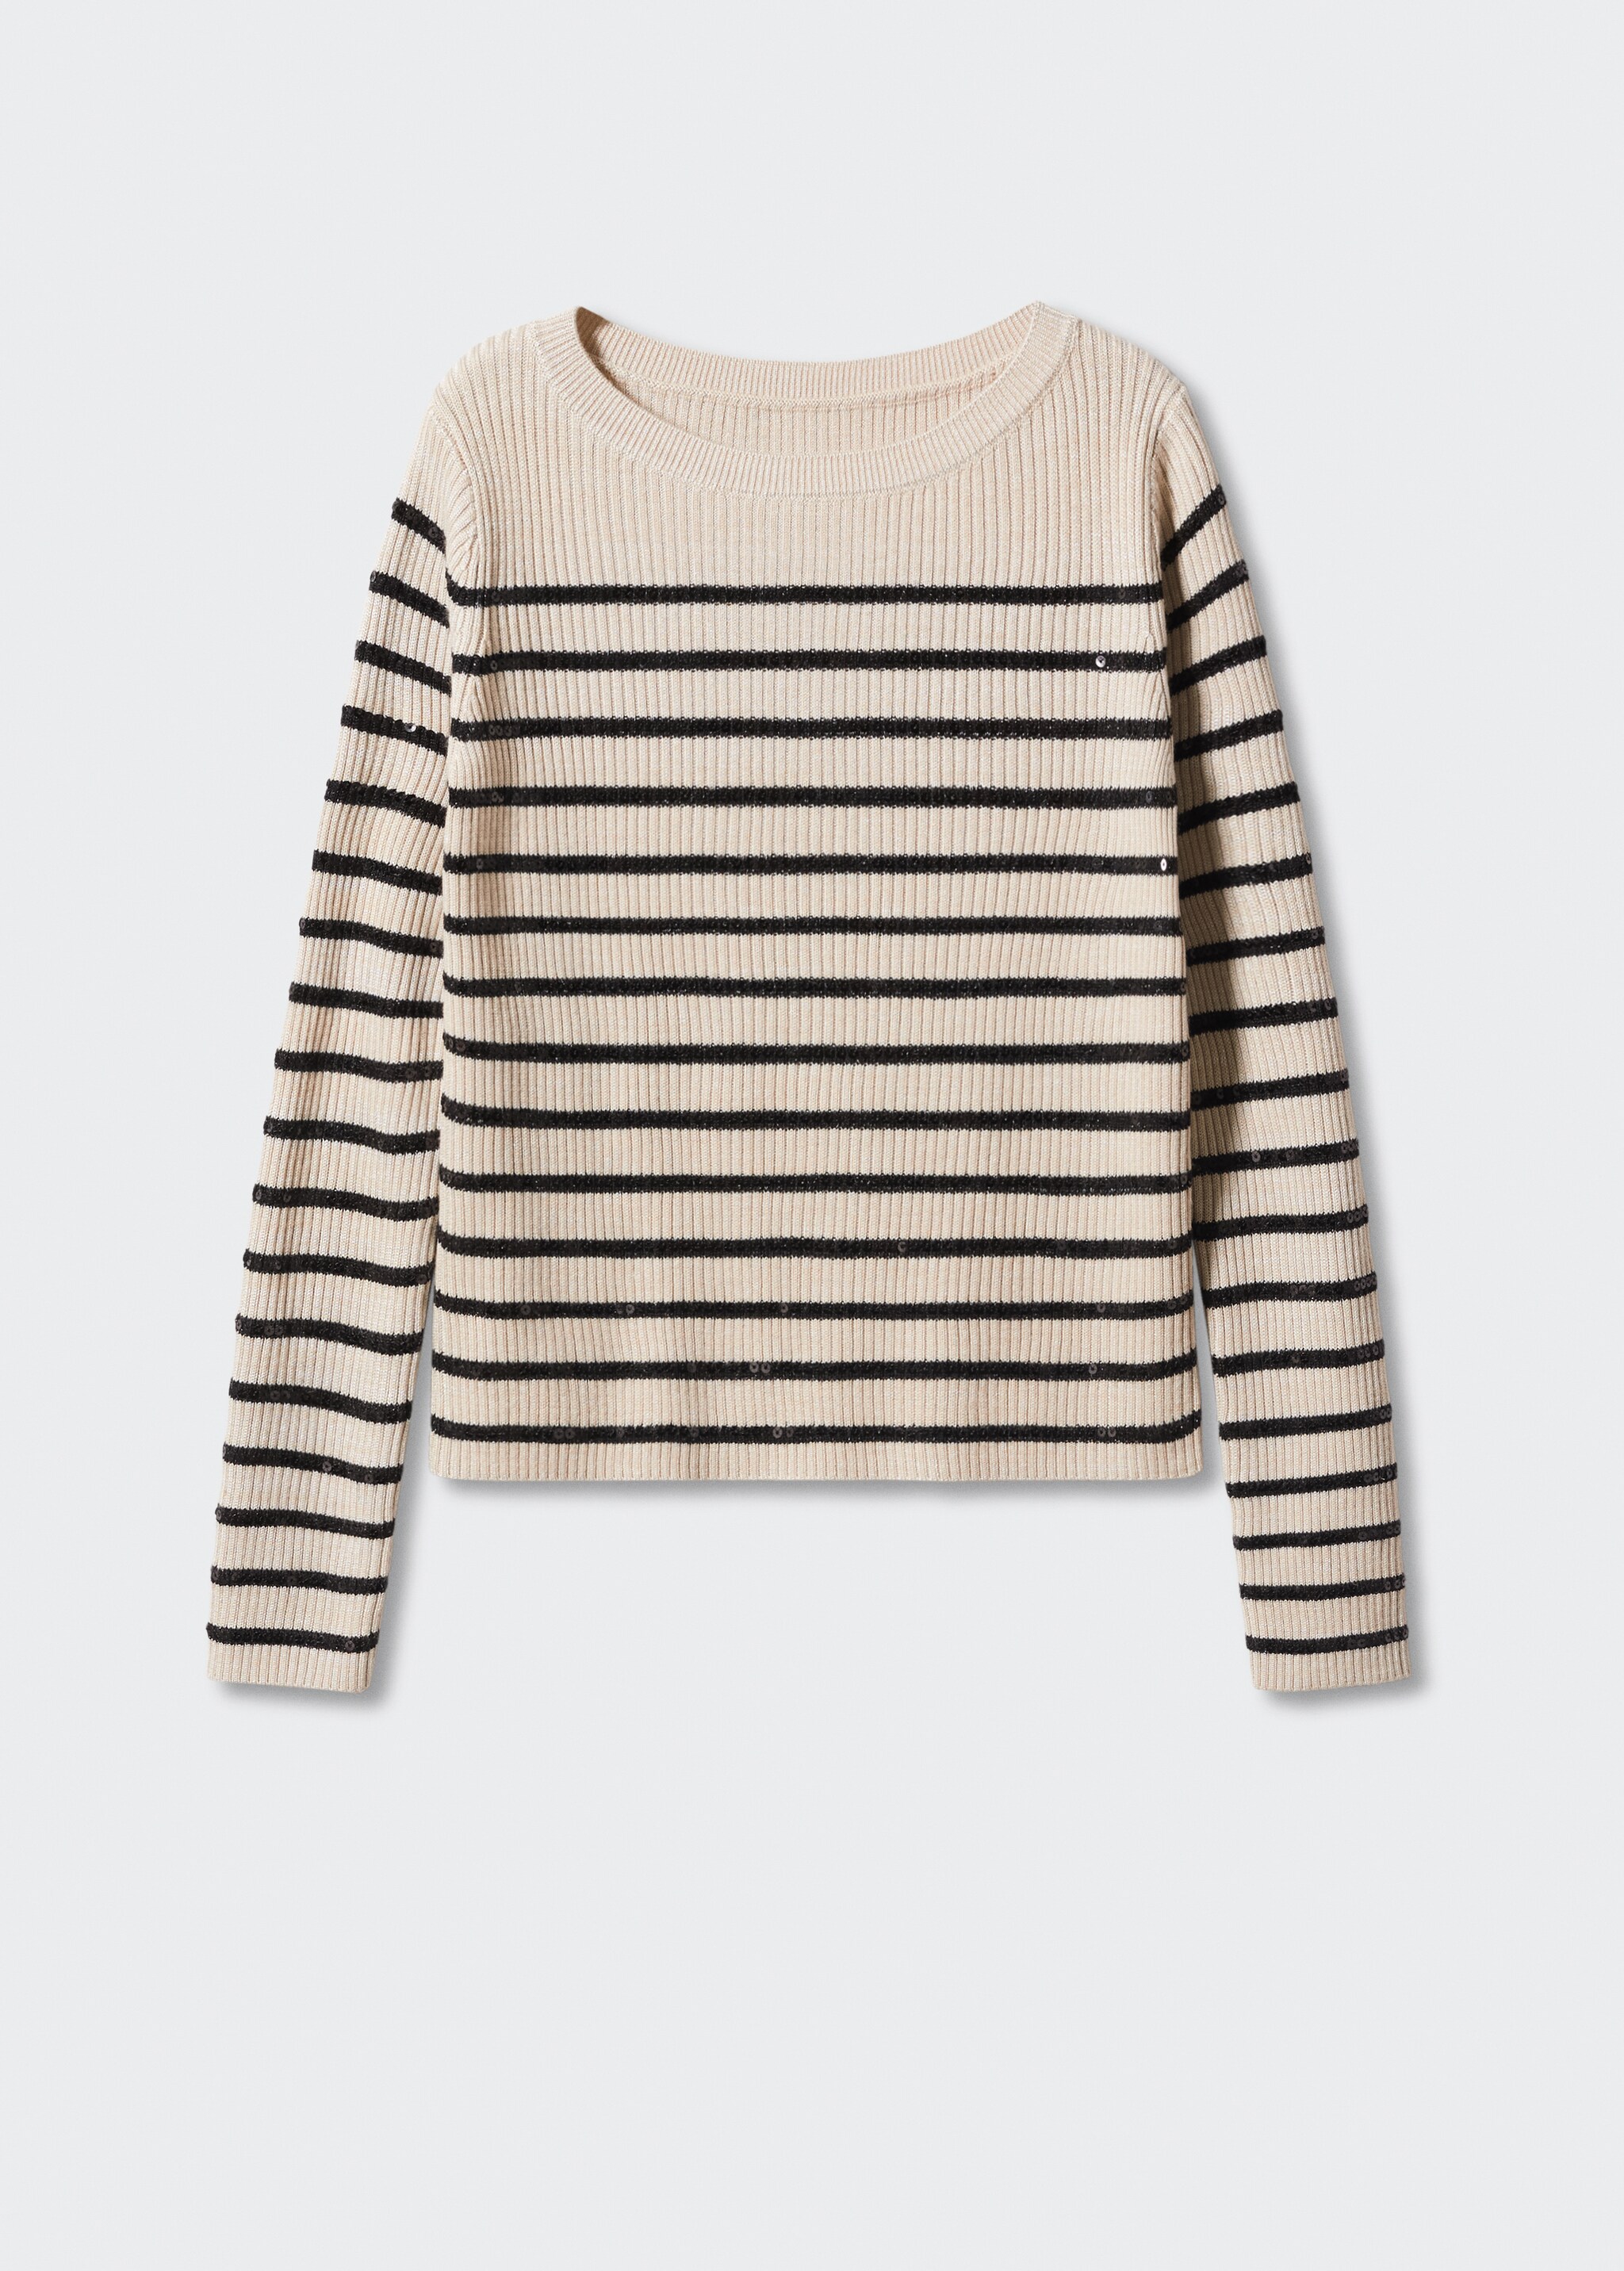 Sequins striped sweater - Article without model